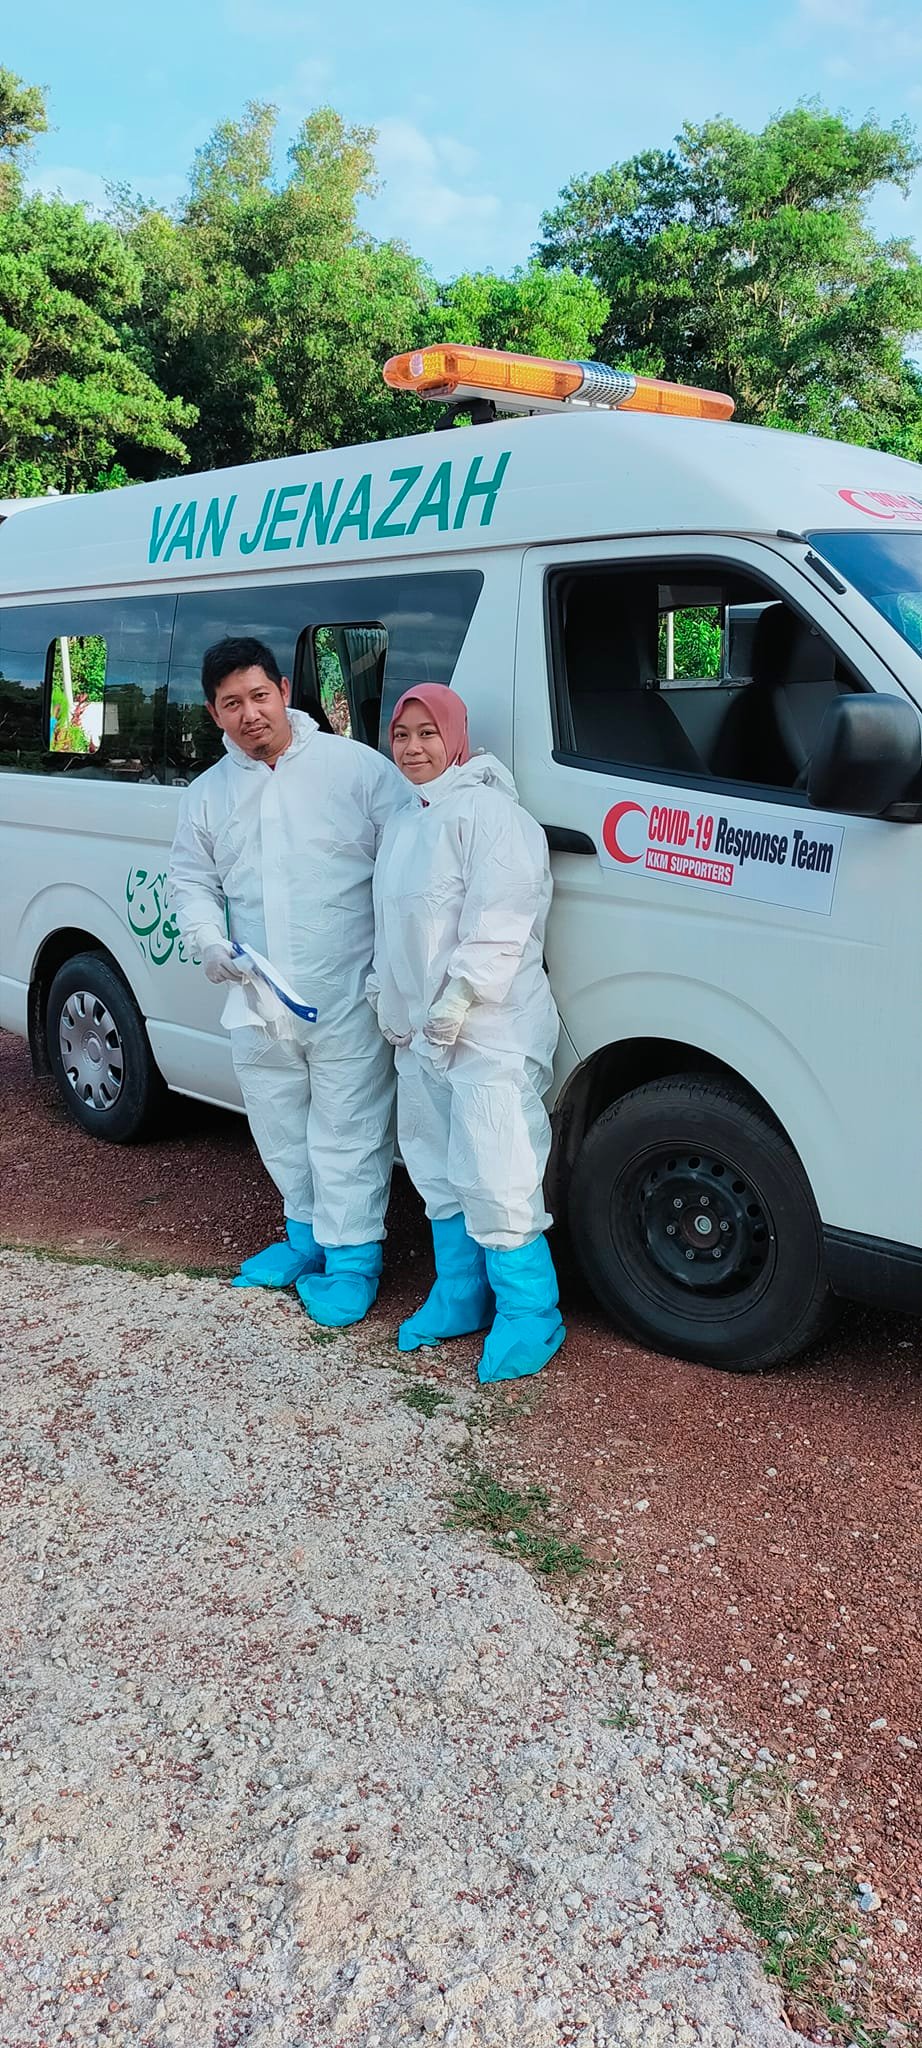 Ridzuan and his wife, Afifah, decided to forgo a honeymoon to help bury deceased COVID-19 patients instead.